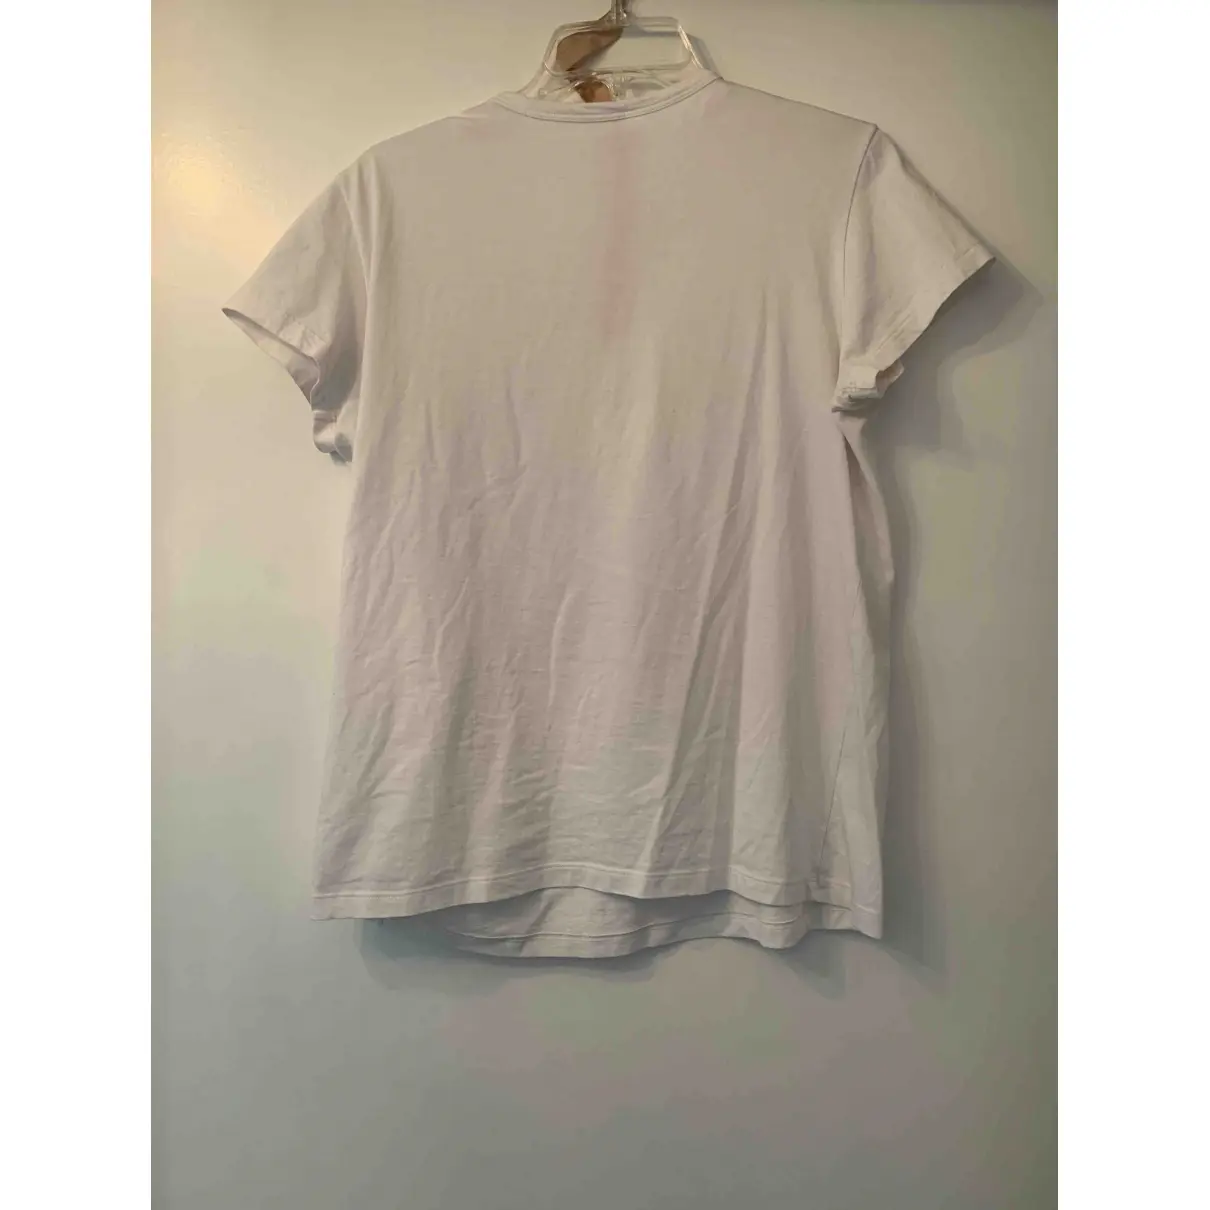 Buy N°21 White Cotton Top online